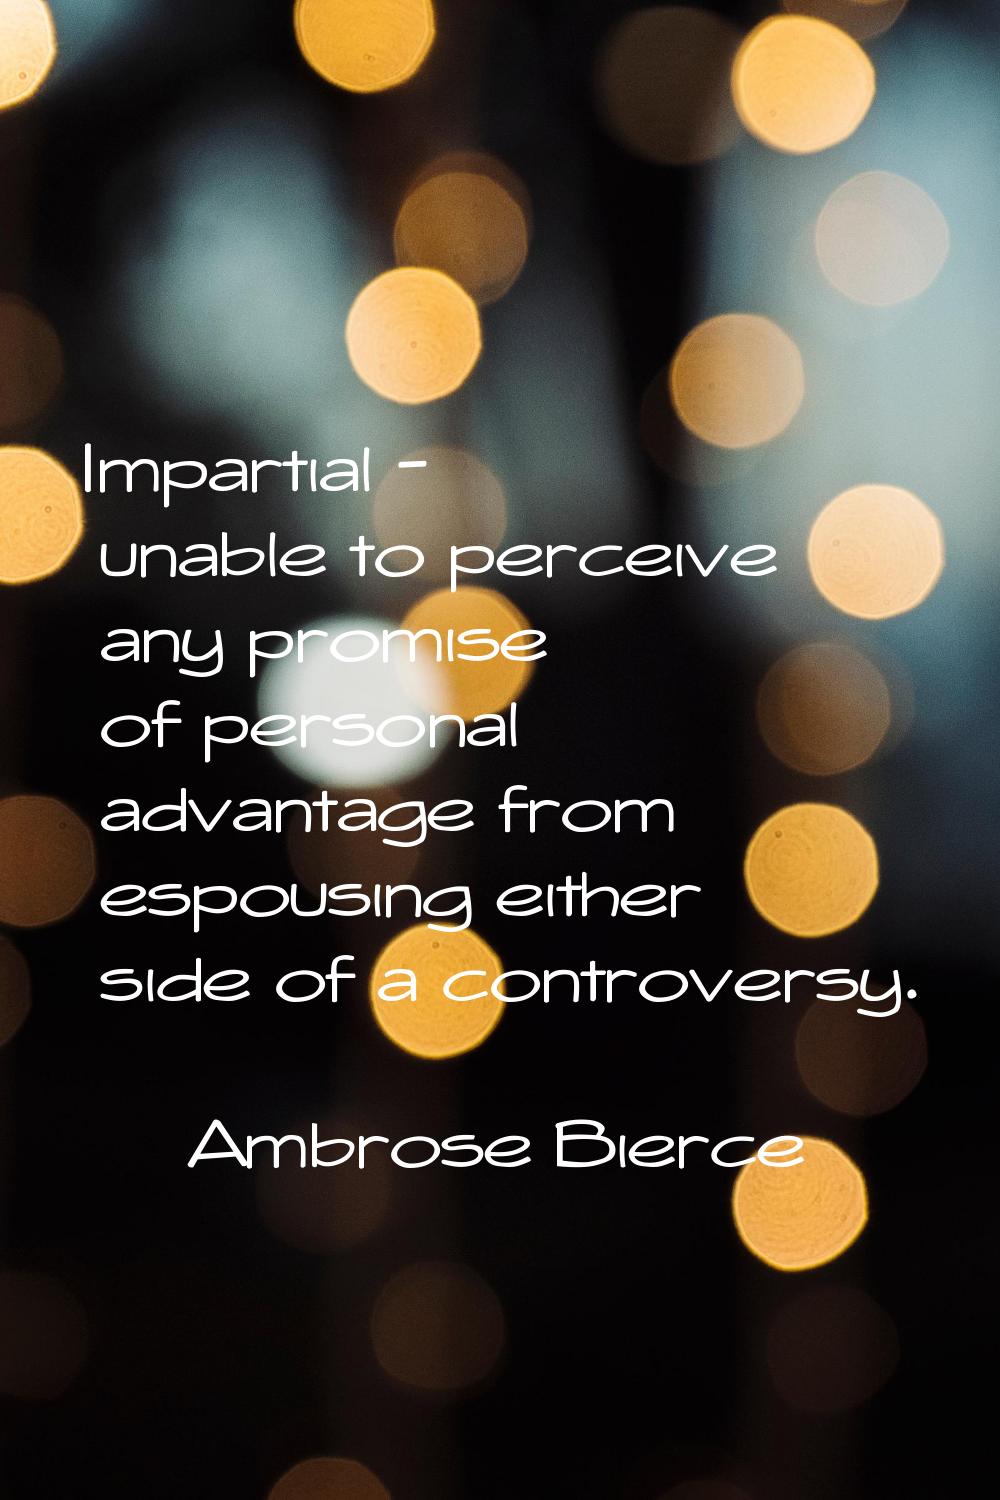 Impartial - unable to perceive any promise of personal advantage from espousing either side of a co